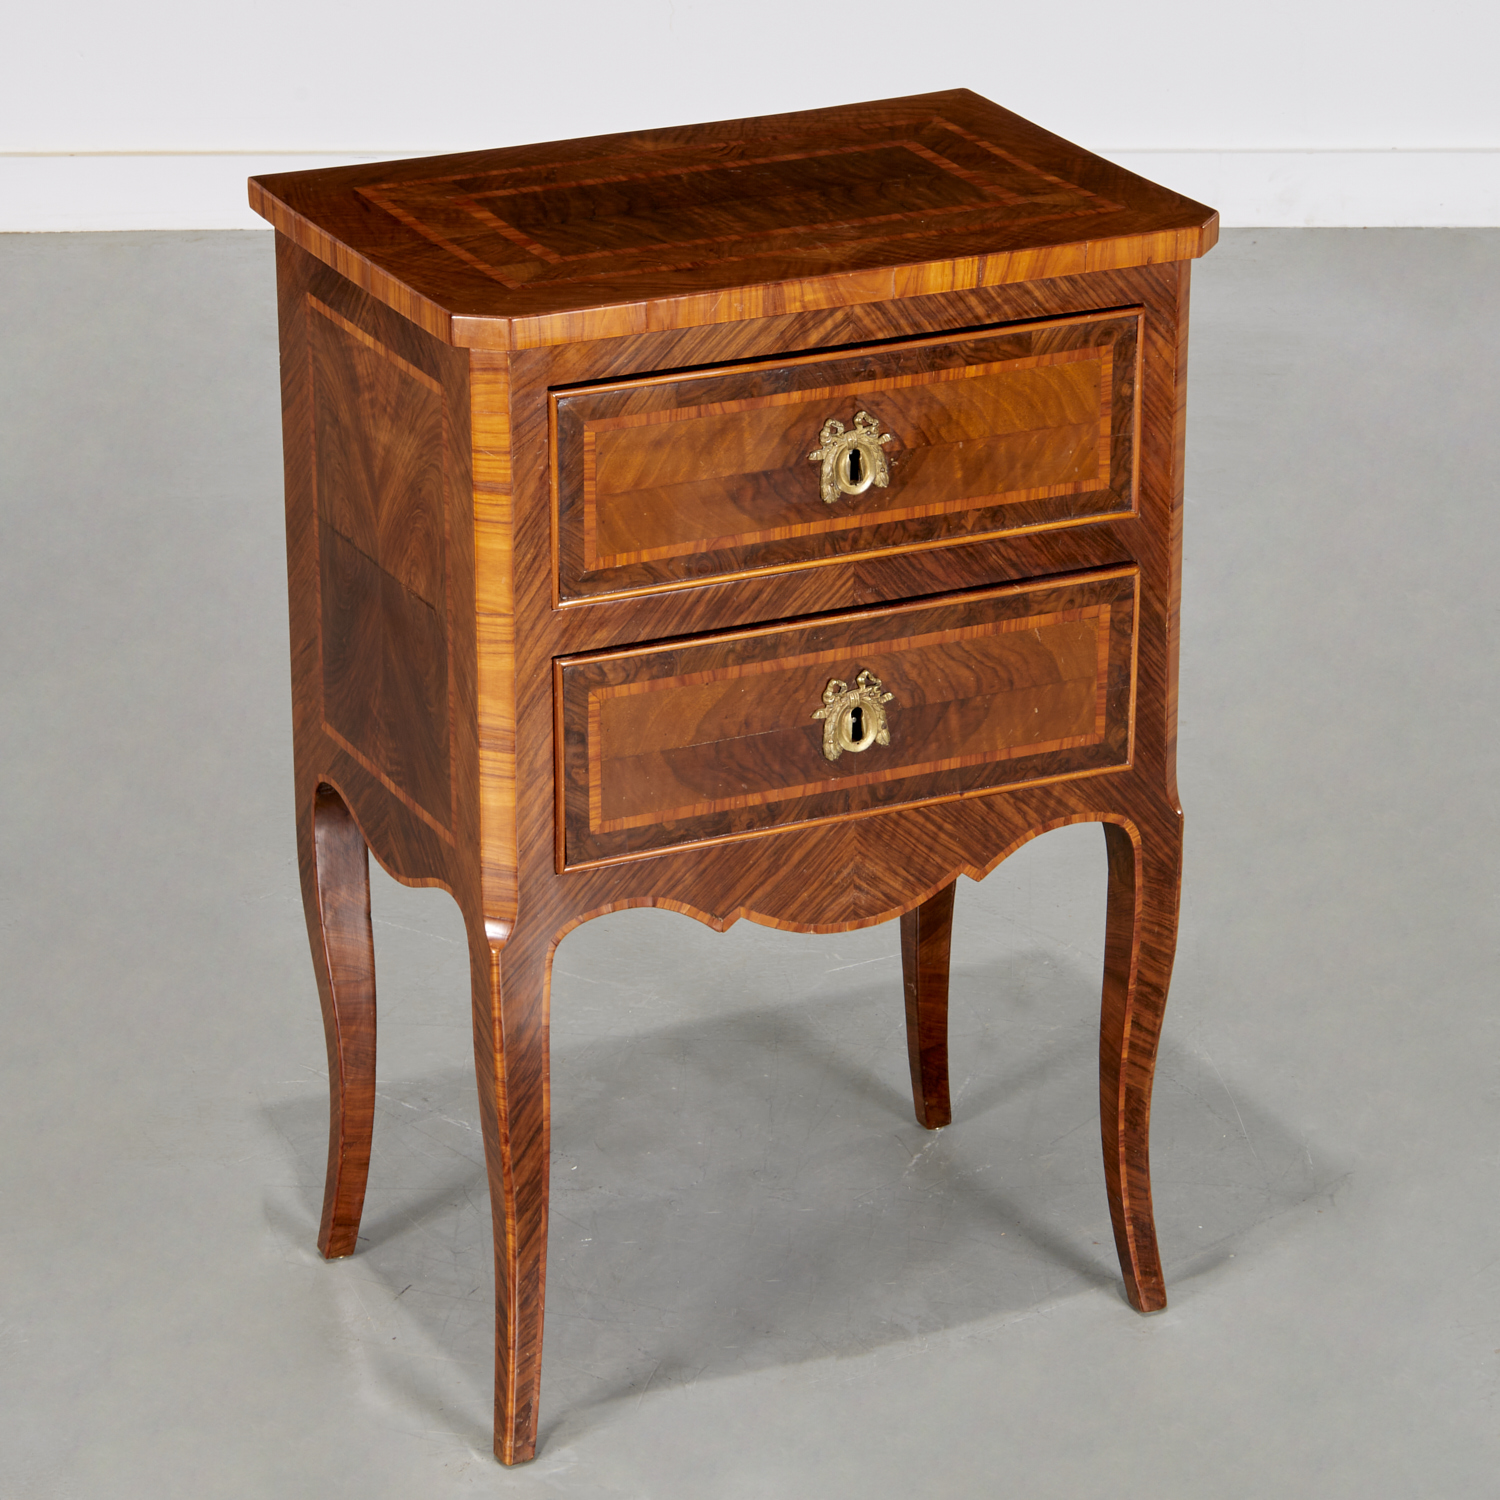 CONTINENTAL PARQUETRY INLAID COMMODE 2fc5e0